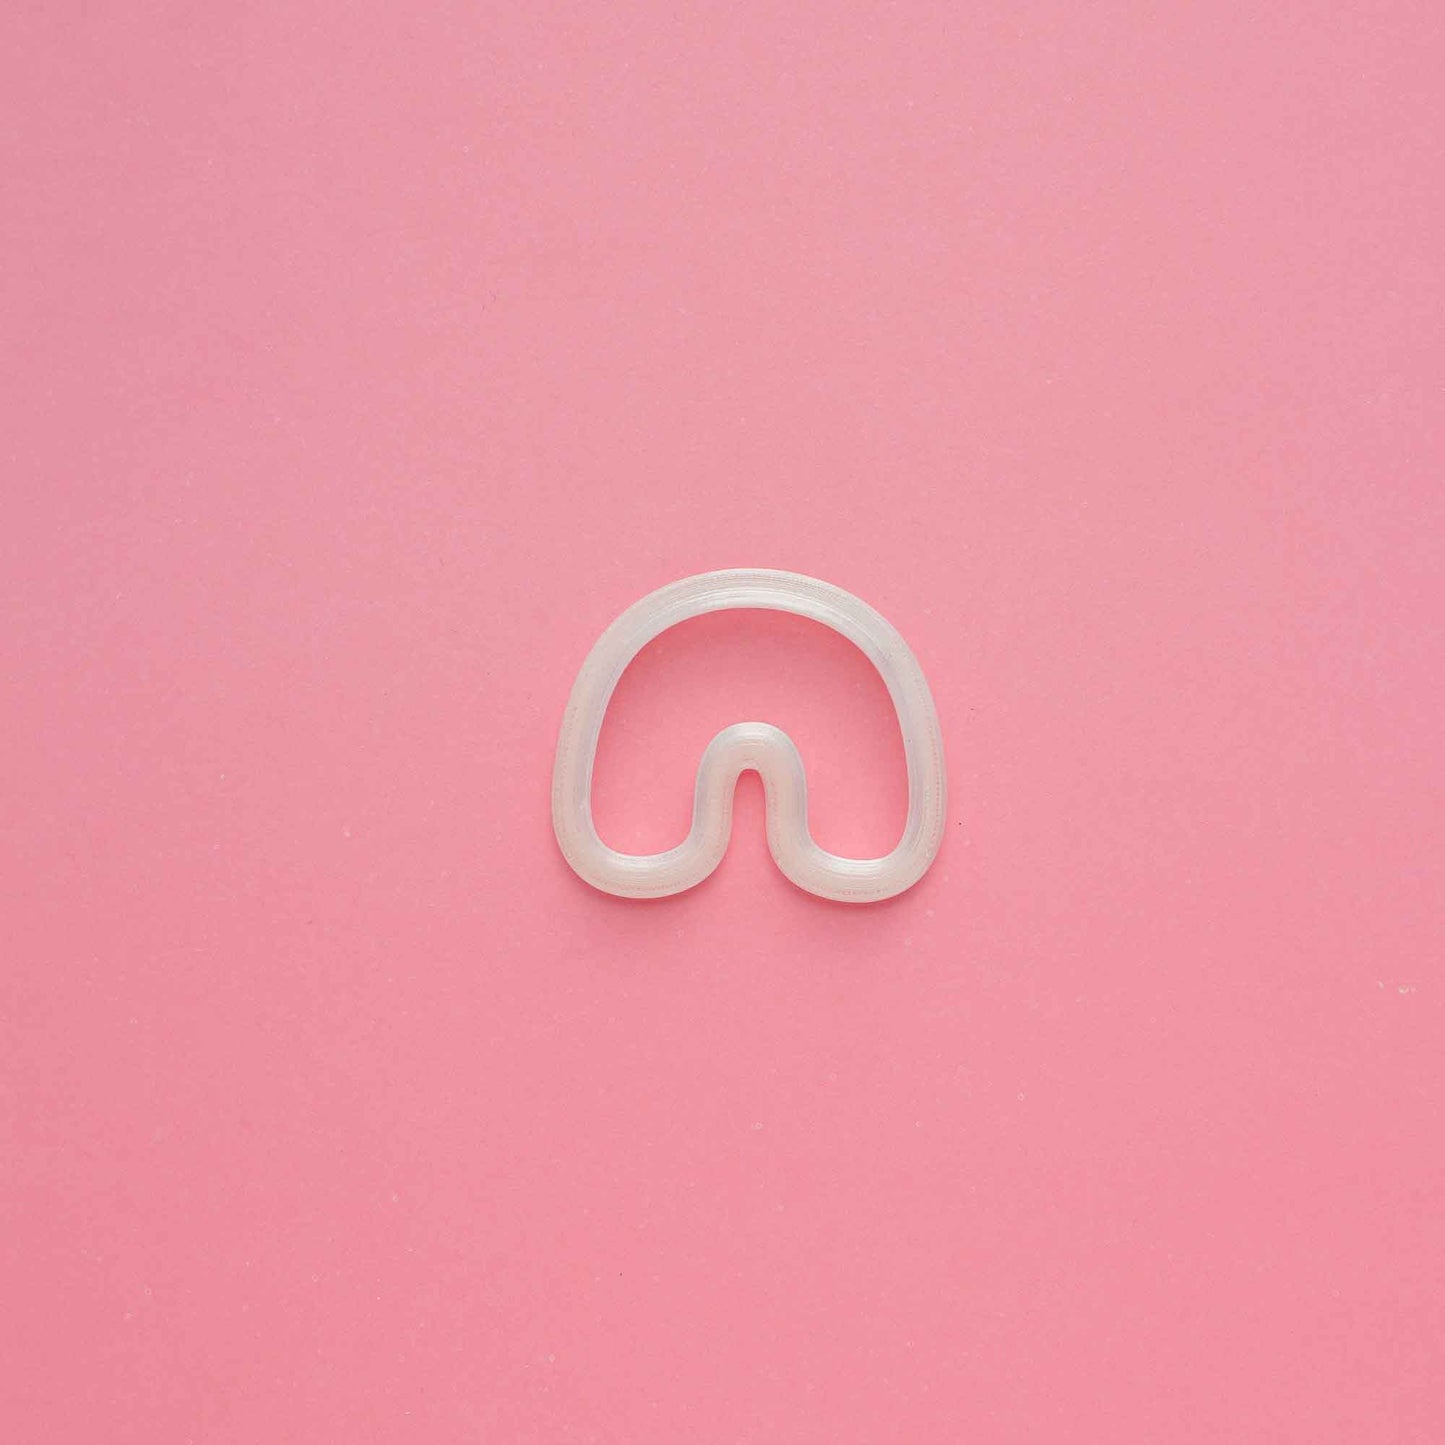 1 clay organic arch clay cutter on a pink background